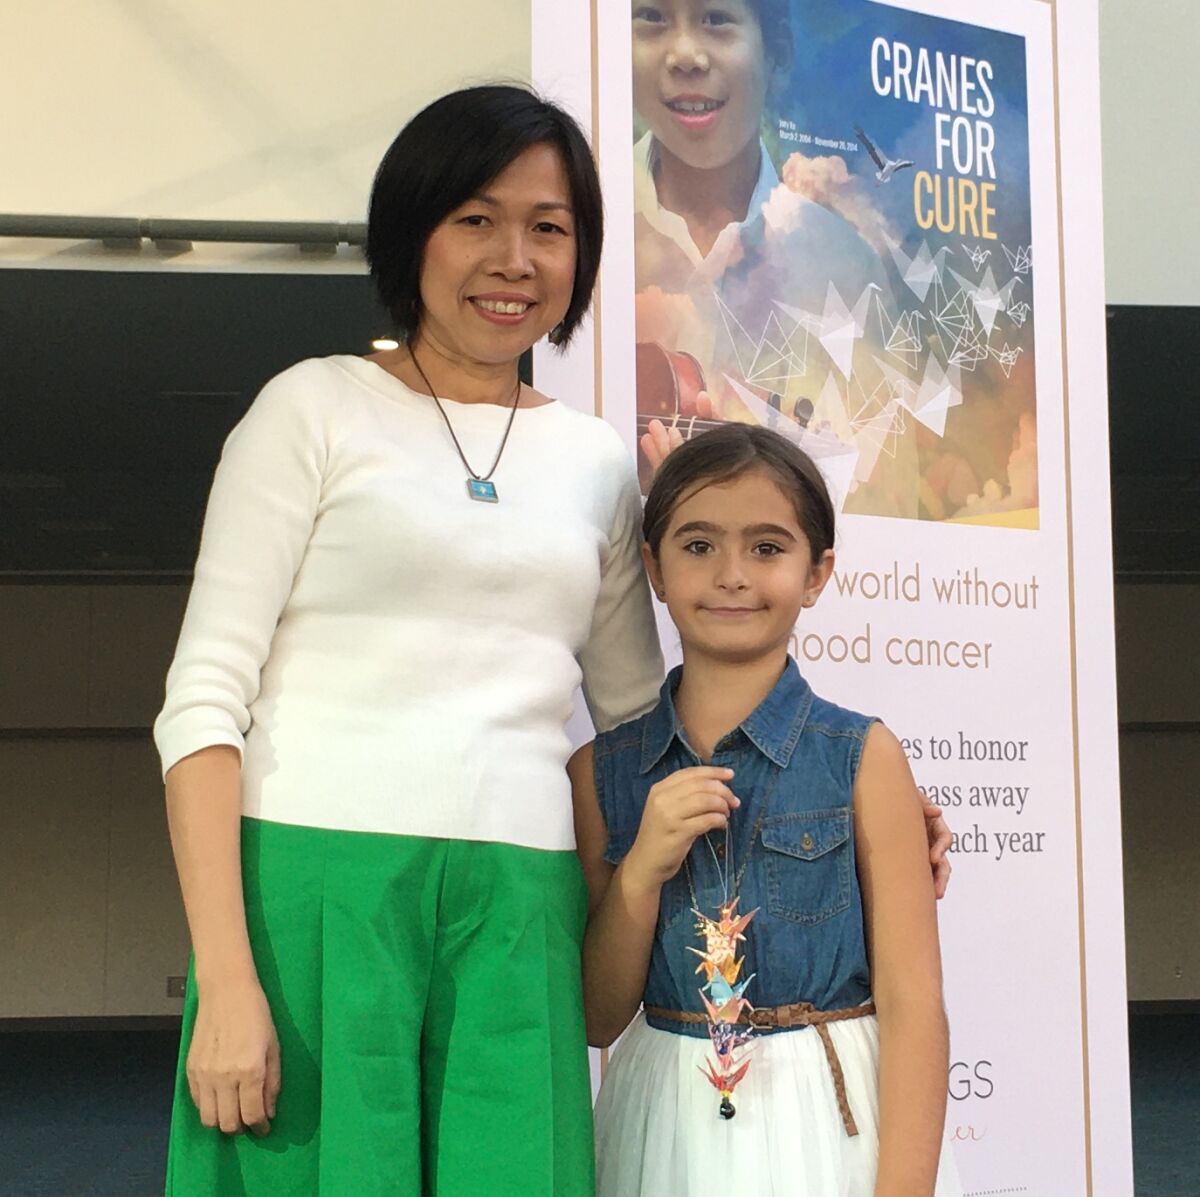 Barnard third-grade teacher Kathy Liu and student India Z. pose beneath the ‘Cranes for a Cure’ Pediatric Cancer Awareness art installation at San Diego Convention Center.